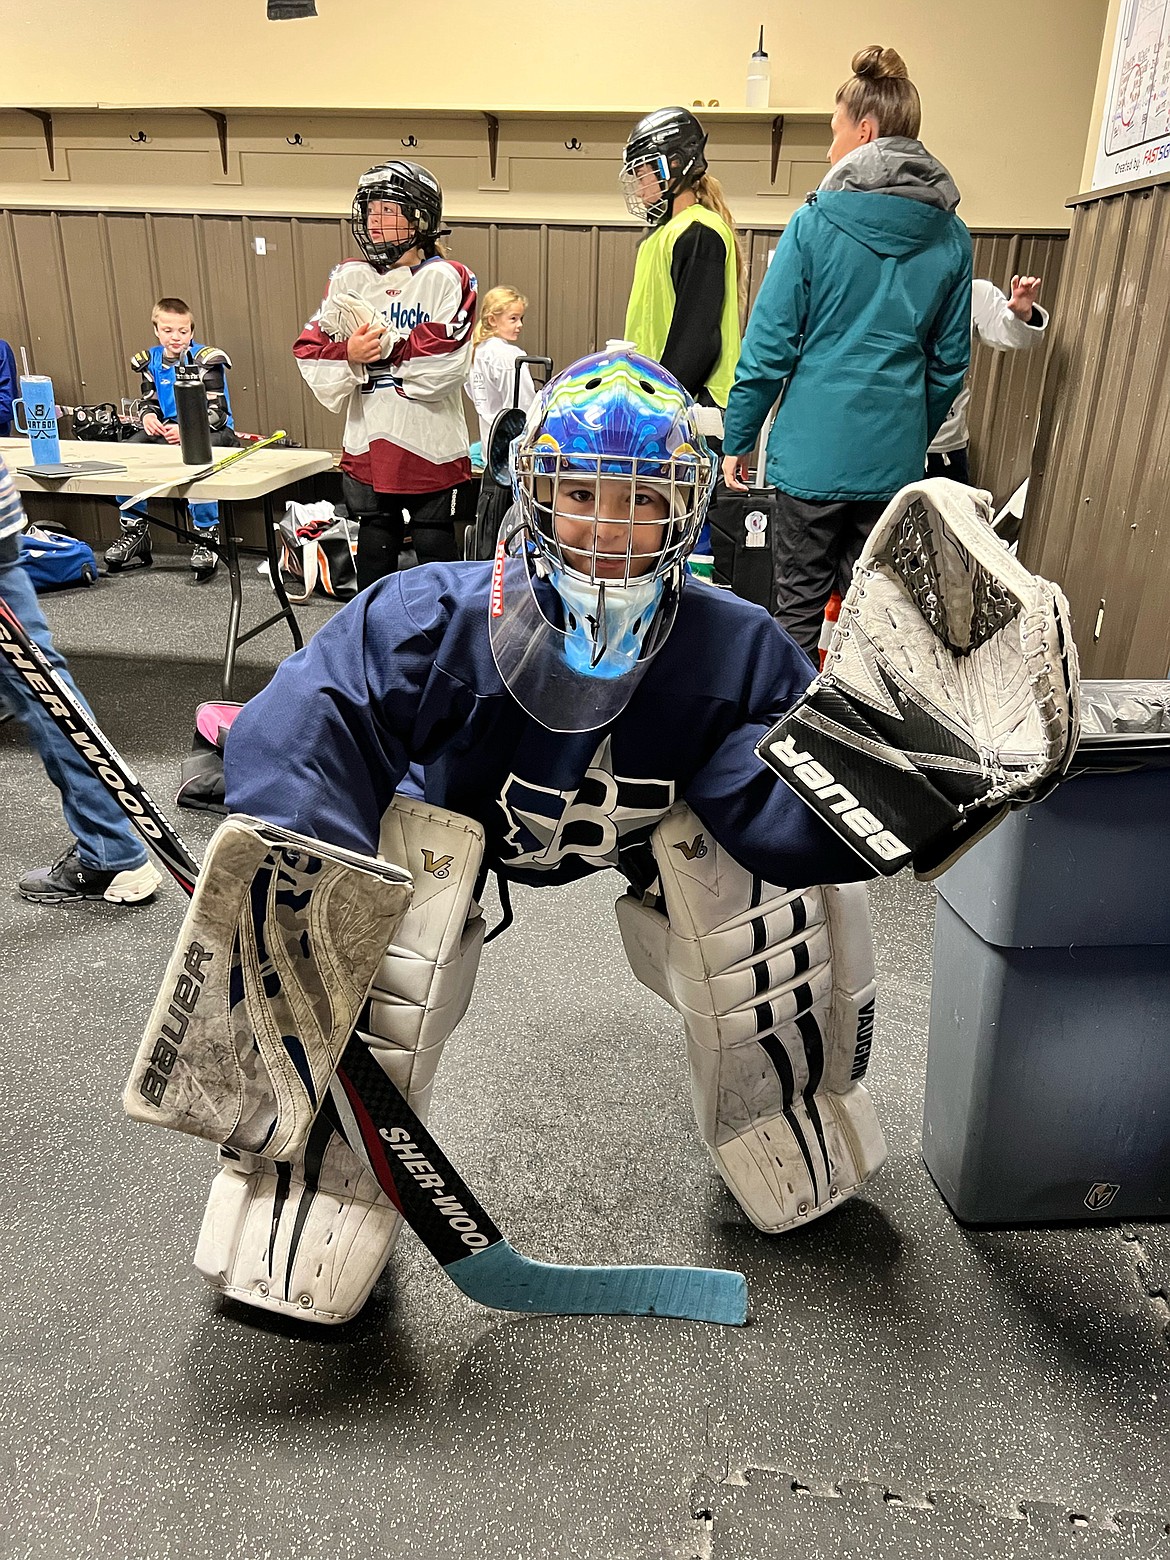 Eight-year-old goalie, Sienna Quinn, dressed out and ready to play at the Stumptown Ice Den during the Fall Into Ice program. (Photo provided)